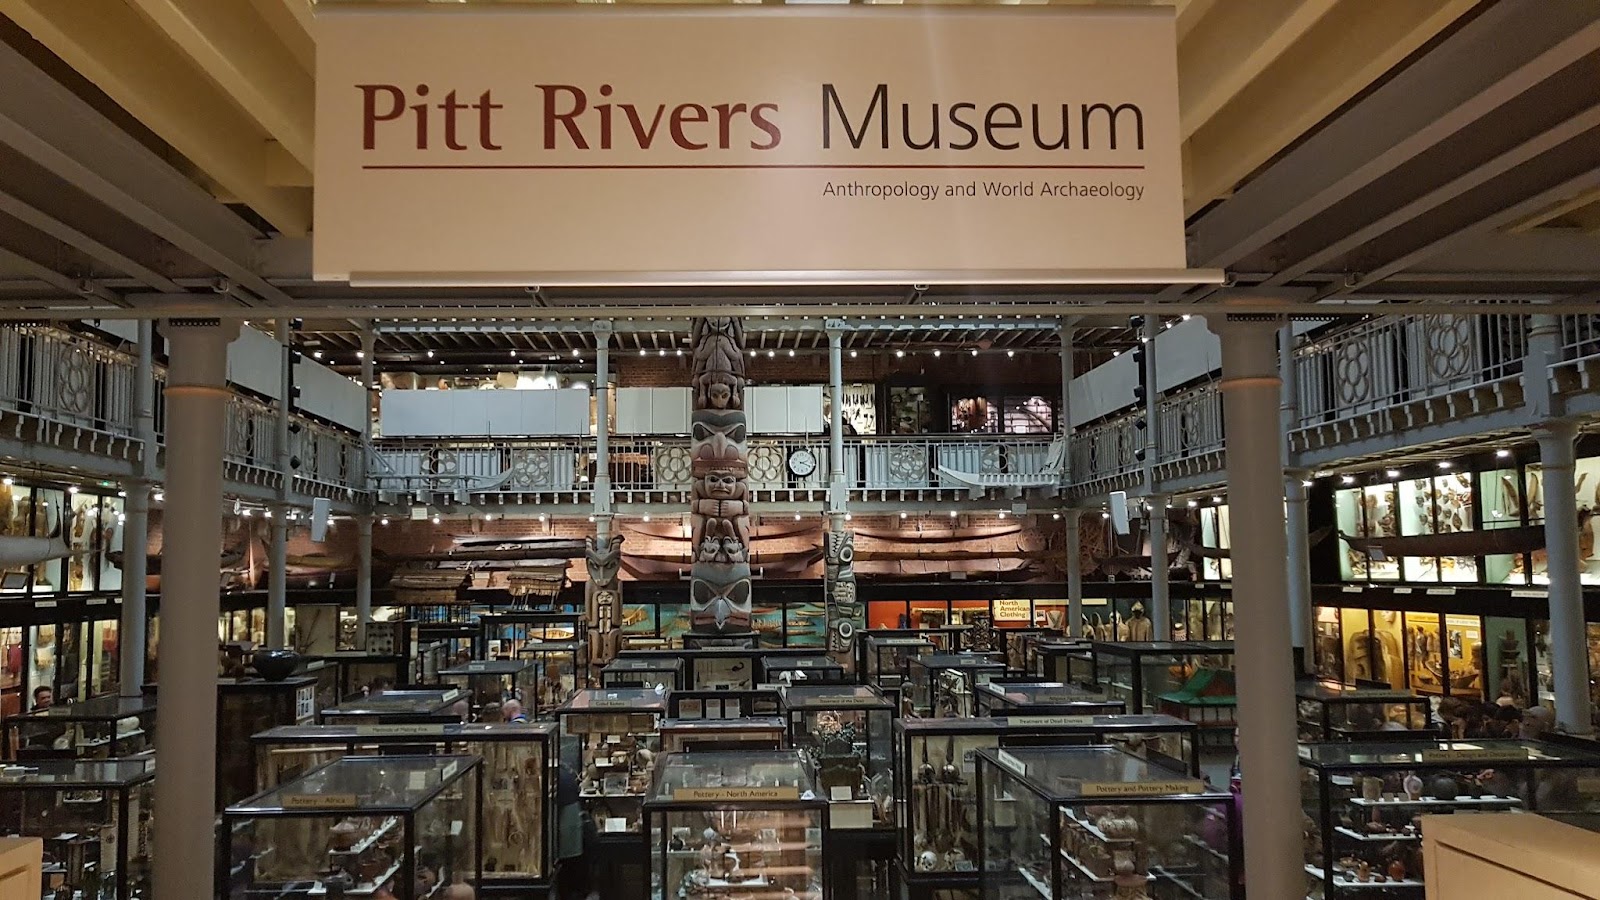 Pitt Rivers Museum: A World of Cultures in Oxford